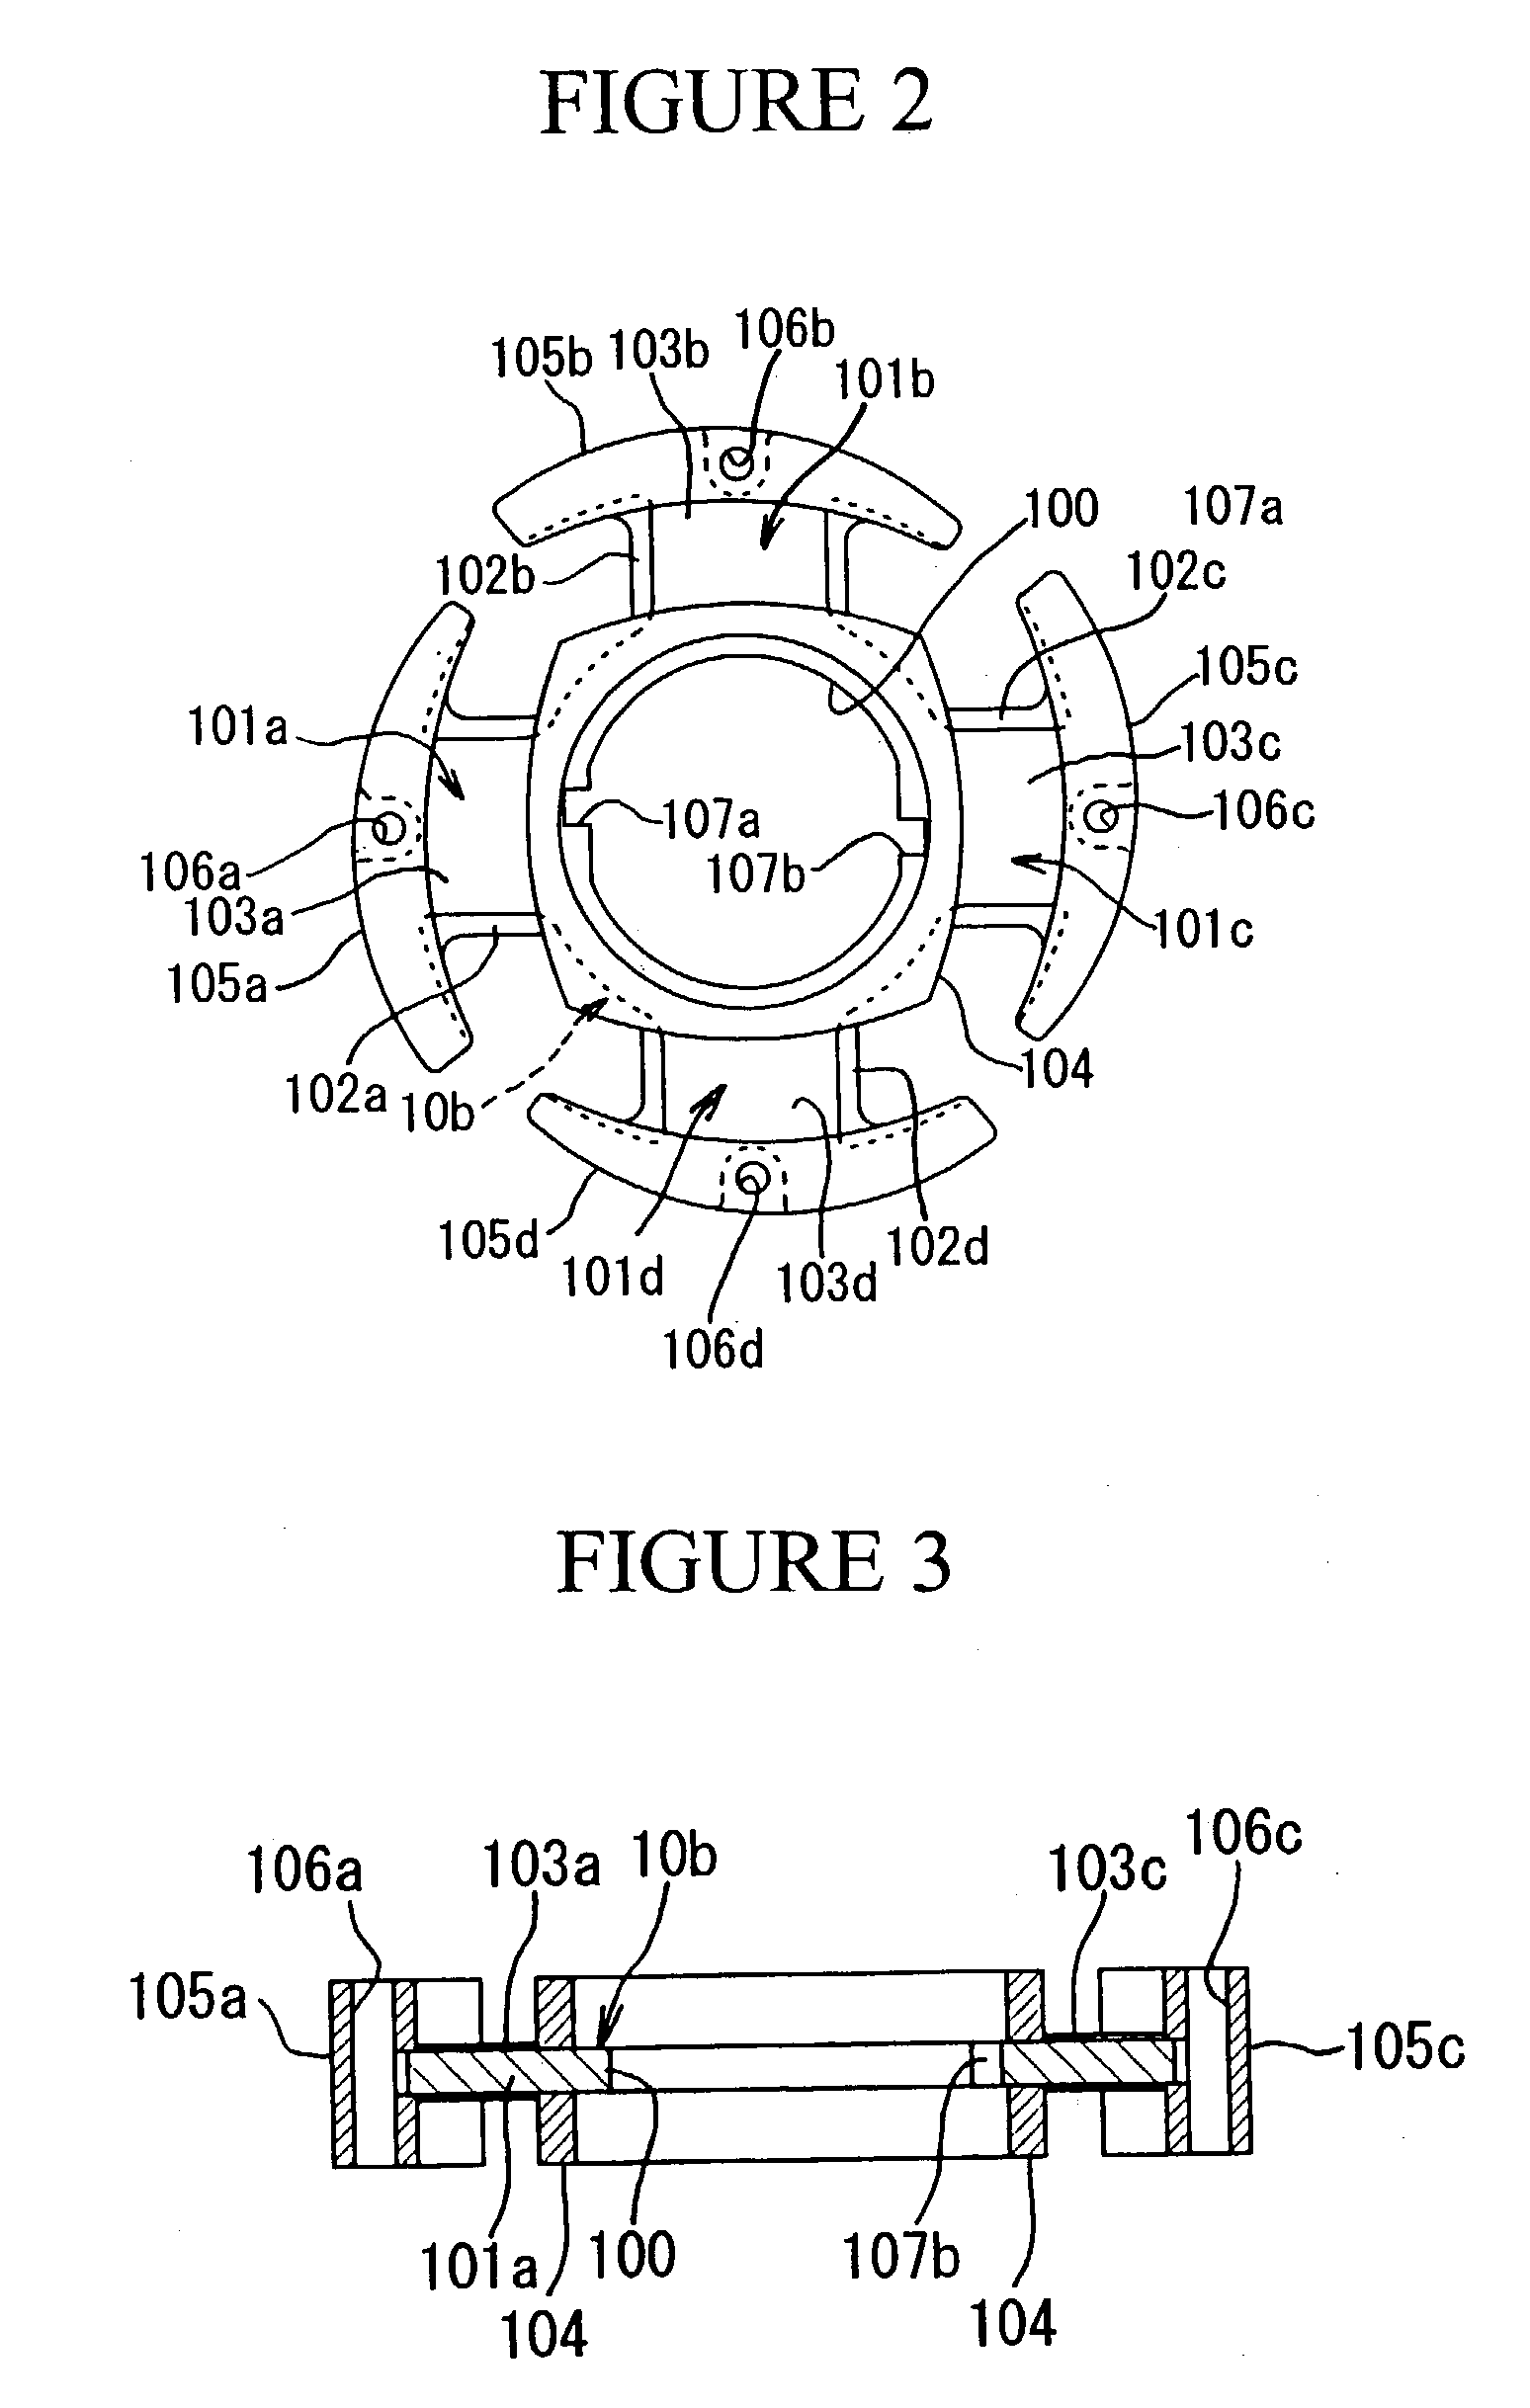 Fluid dynamic pressure bearing for small flat motor, small flat motor, fan motor, and forced air feed type air cell